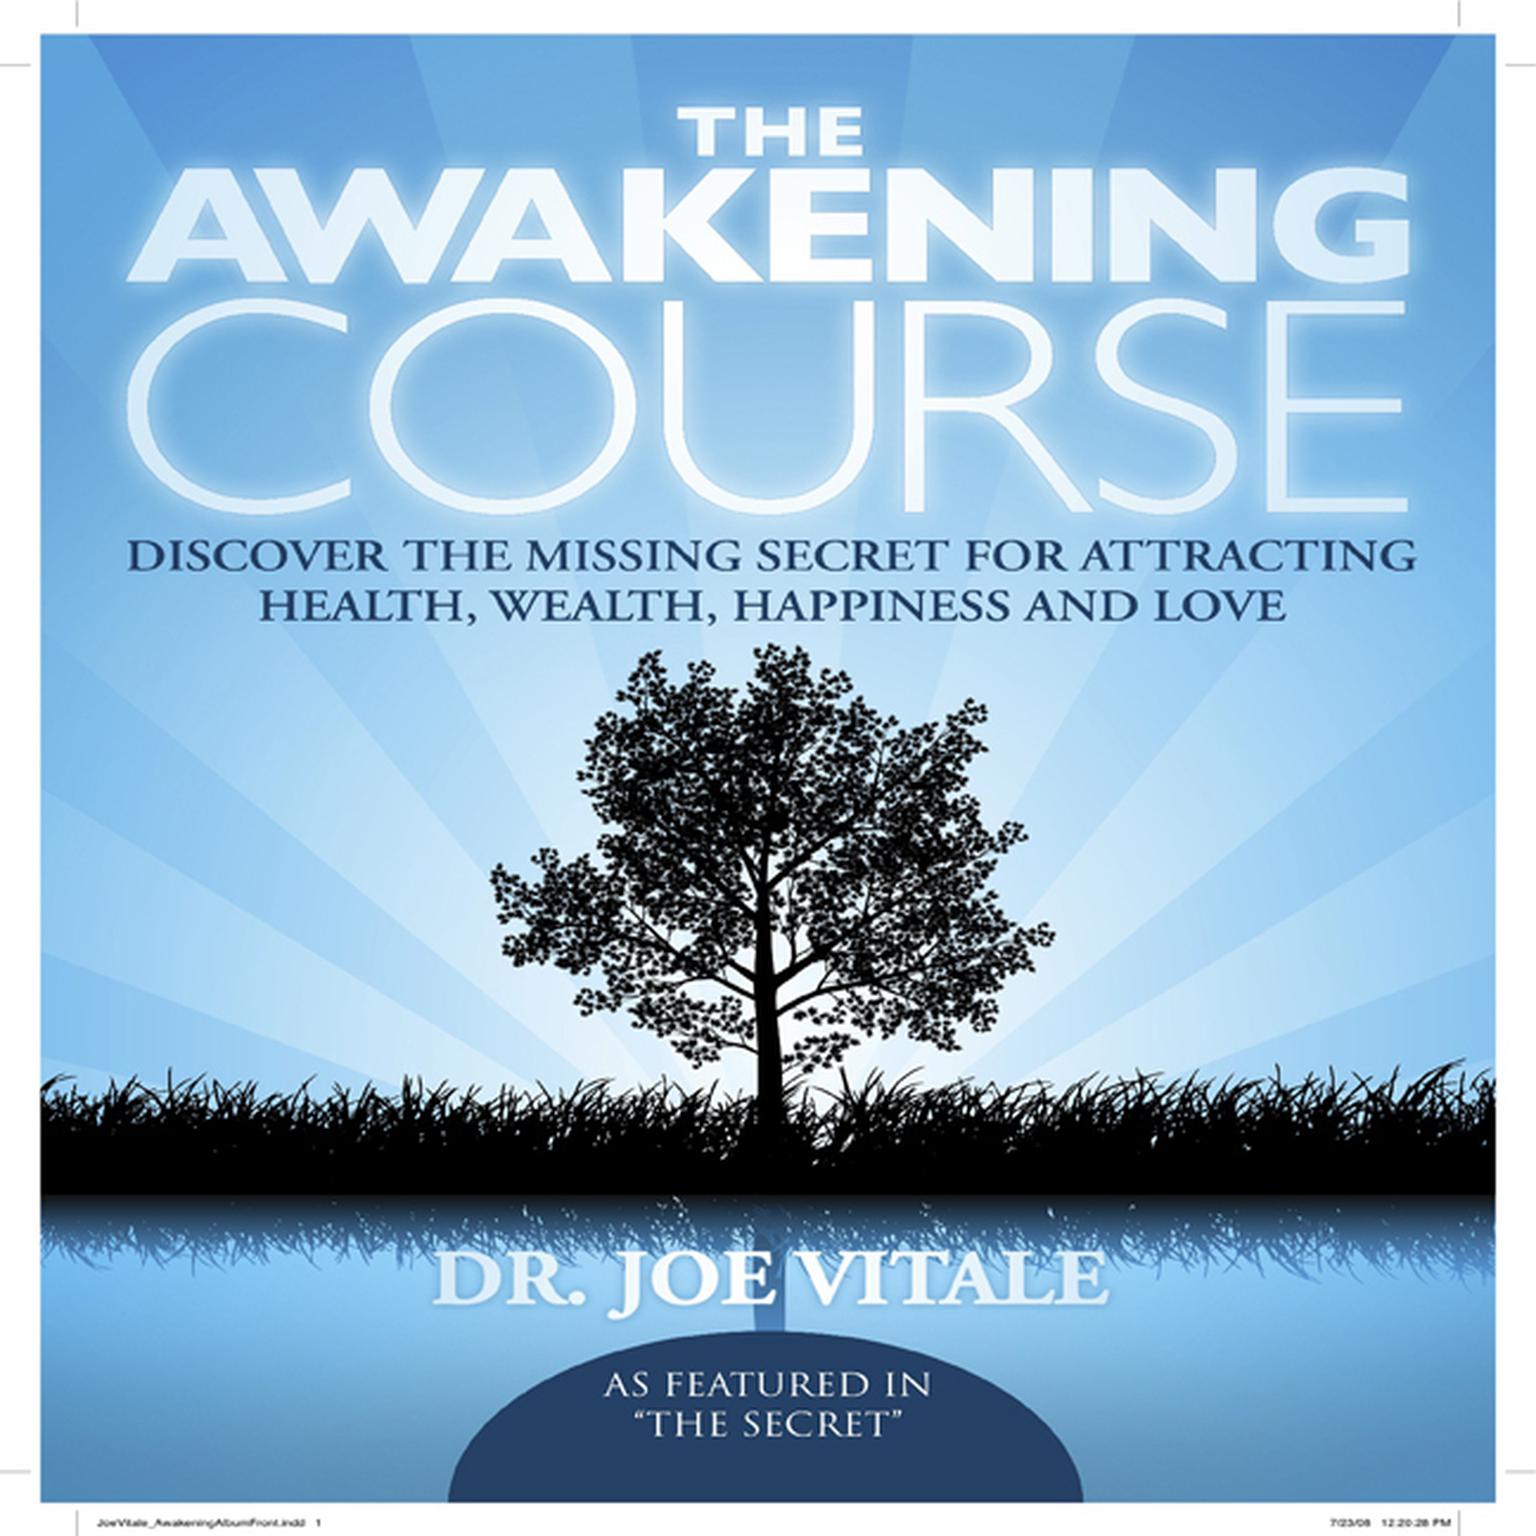 The Awakening Course (Abridged): Discover the Missing Secret for Attracting Health, Wealth, Happiness, and Love! Audiobook, by Joe Vitale